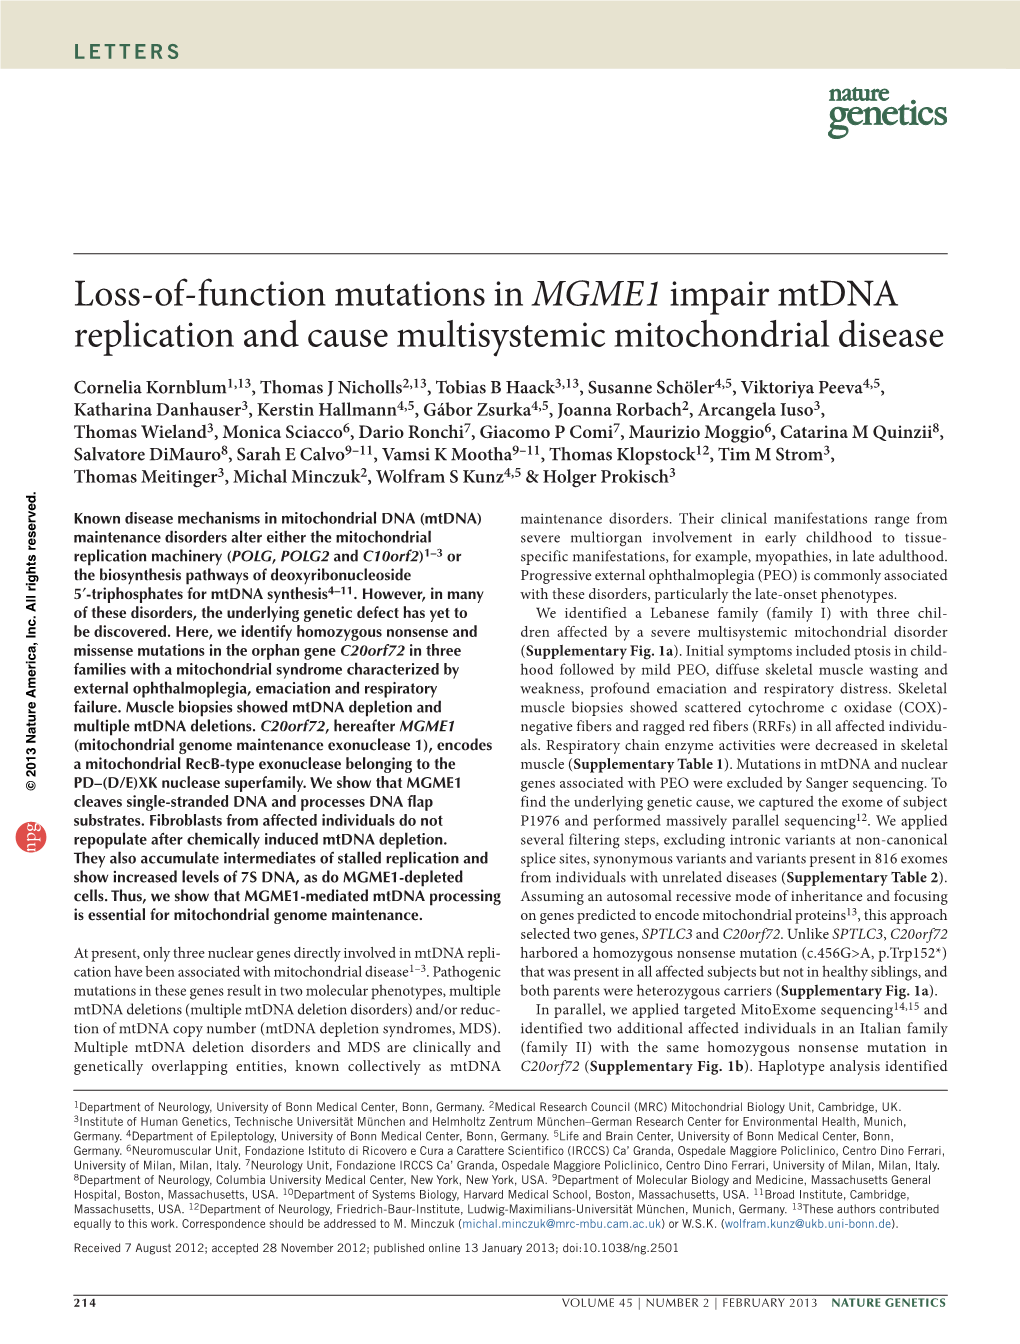 Loss-Of-Function Mutations in MGME1 Impair Mtdna Replication and Cause Multisystemic Mitochondrial Disease